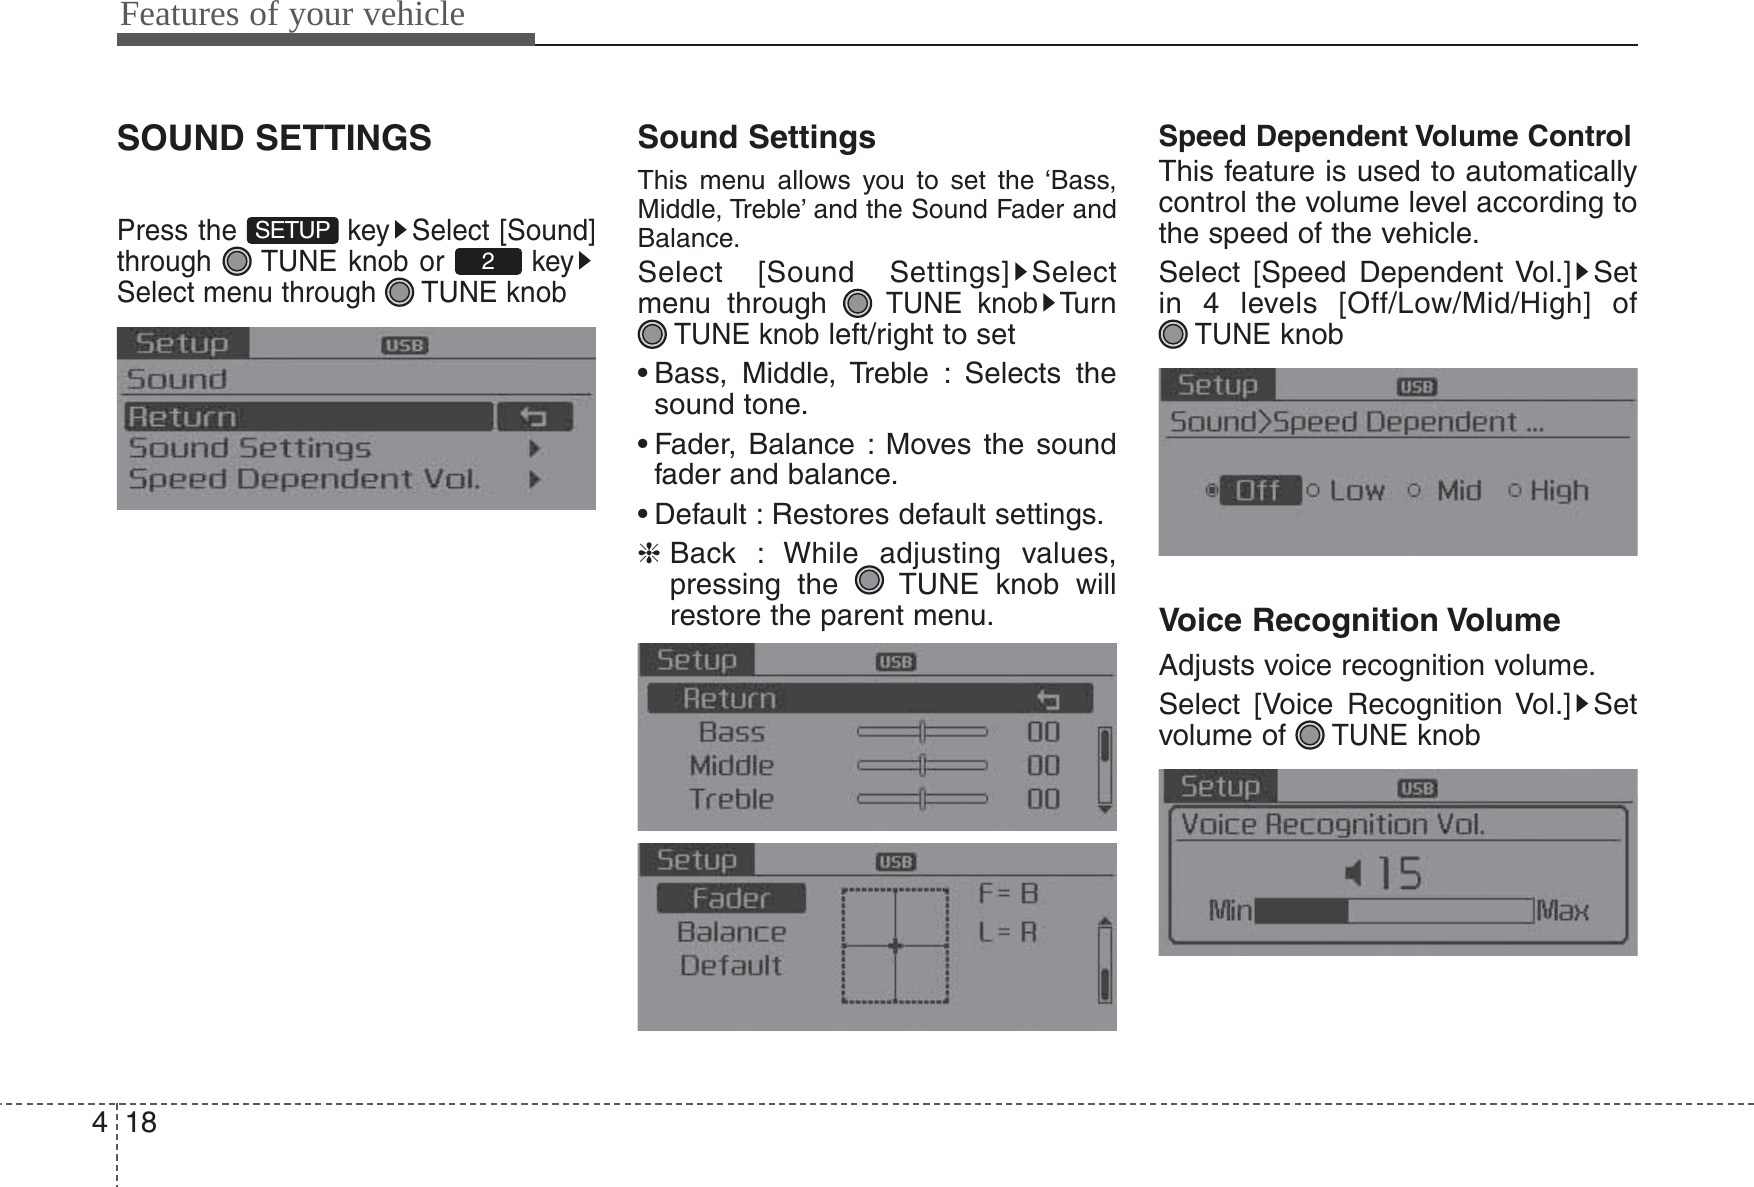 Features of your vehicle184SOUND SETTINGSPress the  key Select [Sound]through  TUNE knob or  keySelect menu through  TUNE knobSound SettingsThis menu allows you to set the ‘Bass,Middle, Treble’ and the Sound Fader andBalance.Select [Sound Settings] Selectmenu through TUNE knobTu r nTUNE knobleft/right to set• Bass, Middle, Treble : Selects thesound tone.• Fader, Balance : Moves the soundfader and balance.• Default : Restores default settings.❈Back : While adjusting values,pressing the  TUNE knob willrestore the parent menu.Speed Dependent Volume ControlThis feature is used to automaticallycontrol the volume level according tothe speed of the vehicle.Select [Speed Dependent Vol.] Setin 4 levels [Off/Low/Mid/High] of TUNEknobVoice Recognition VolumeAdjusts voice recognition volume.Select [Voice Recognition Vol.] Setvolume of TUNEknob2SETUP